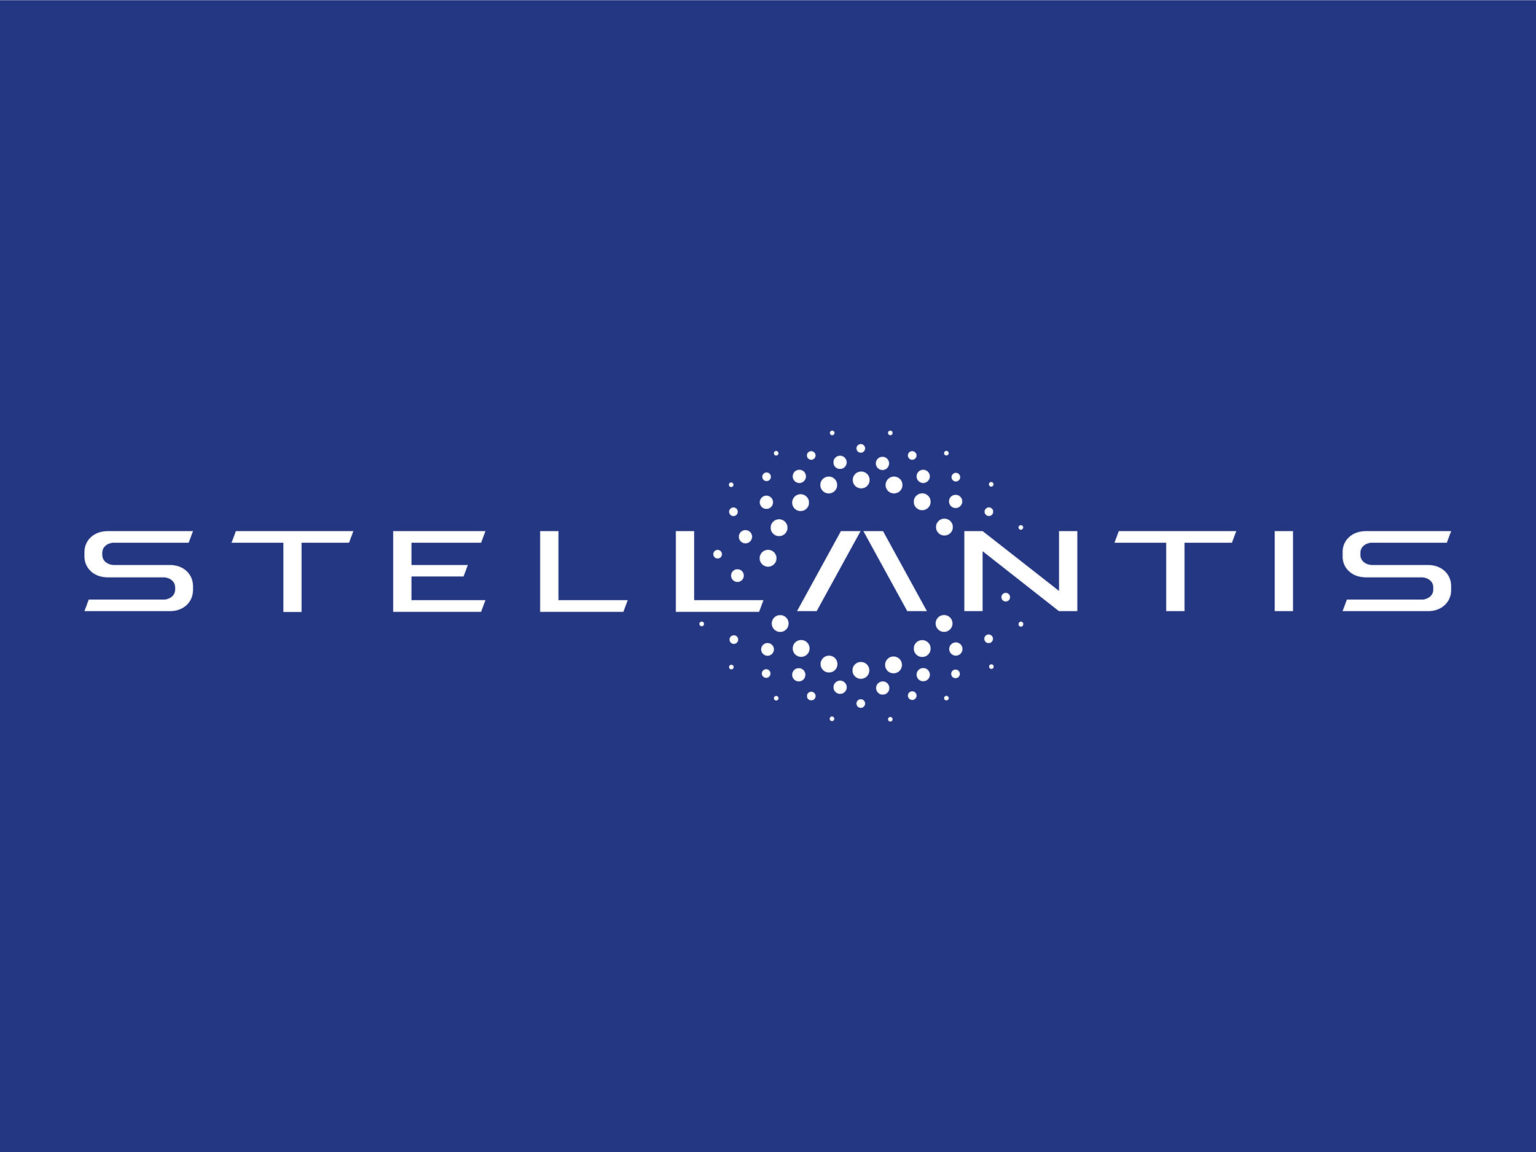 A new Stellantis company logo was revealed last year ahead of Groupe PSA-Fiat Chrysler merger.